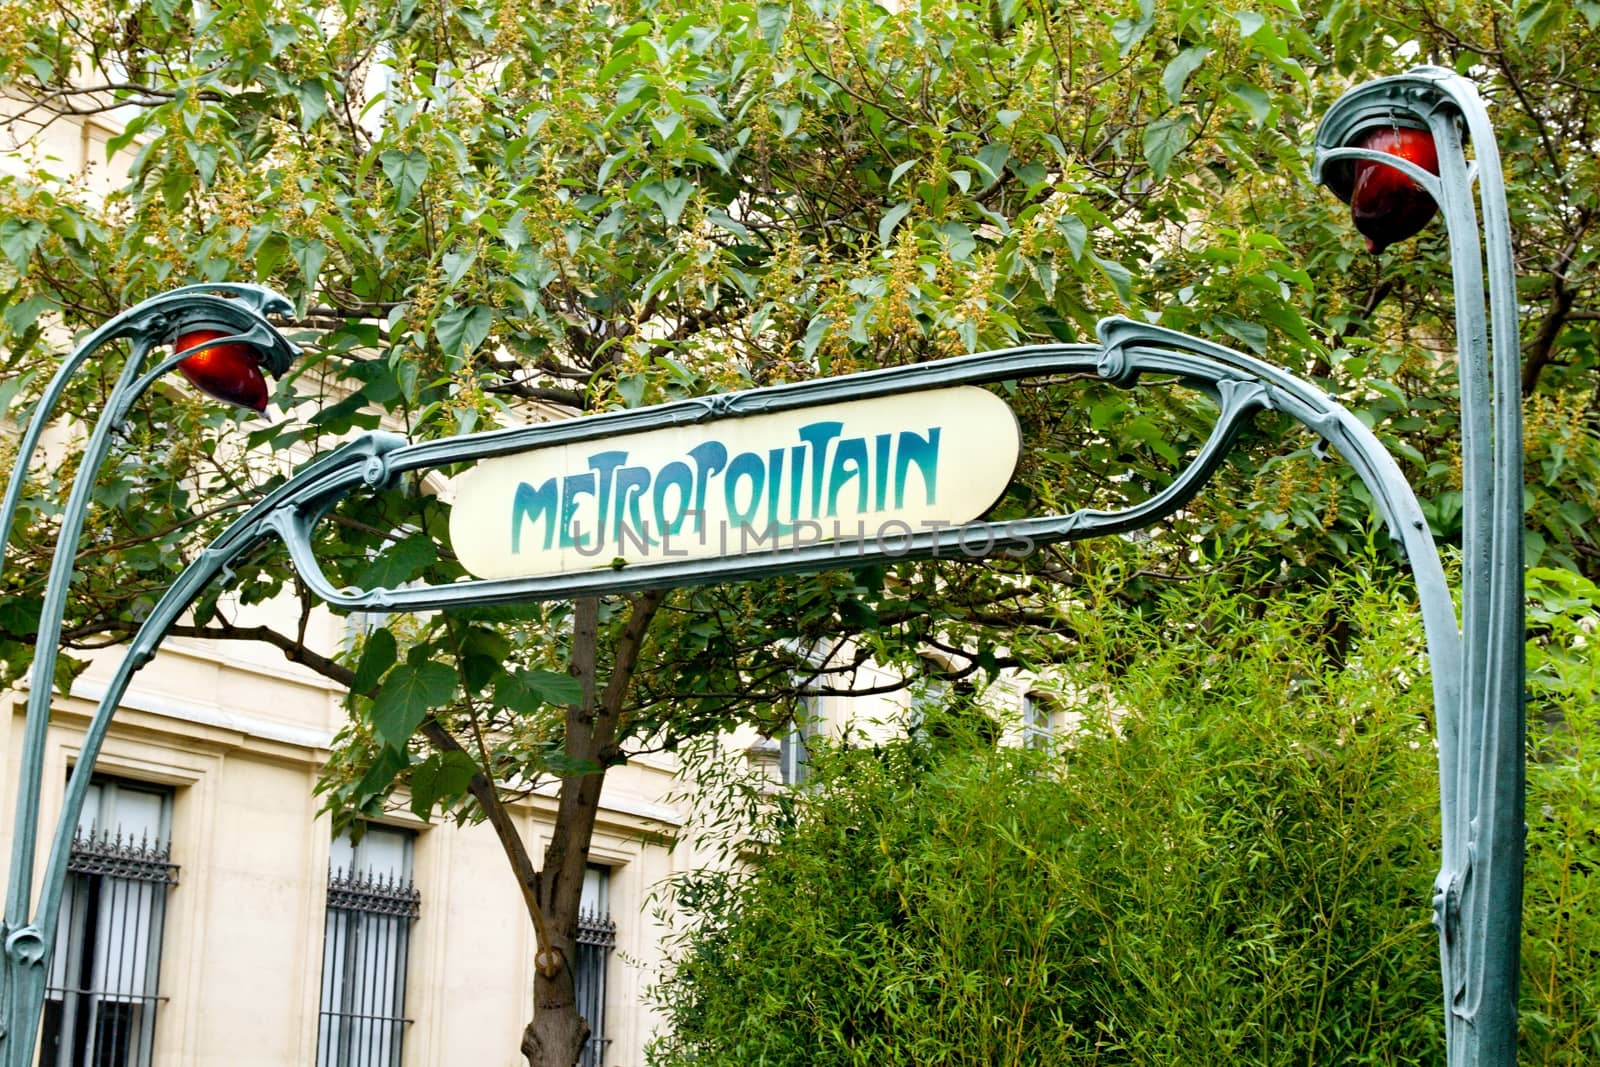 Photo shows old Parisian metro sign in front of the entrance.